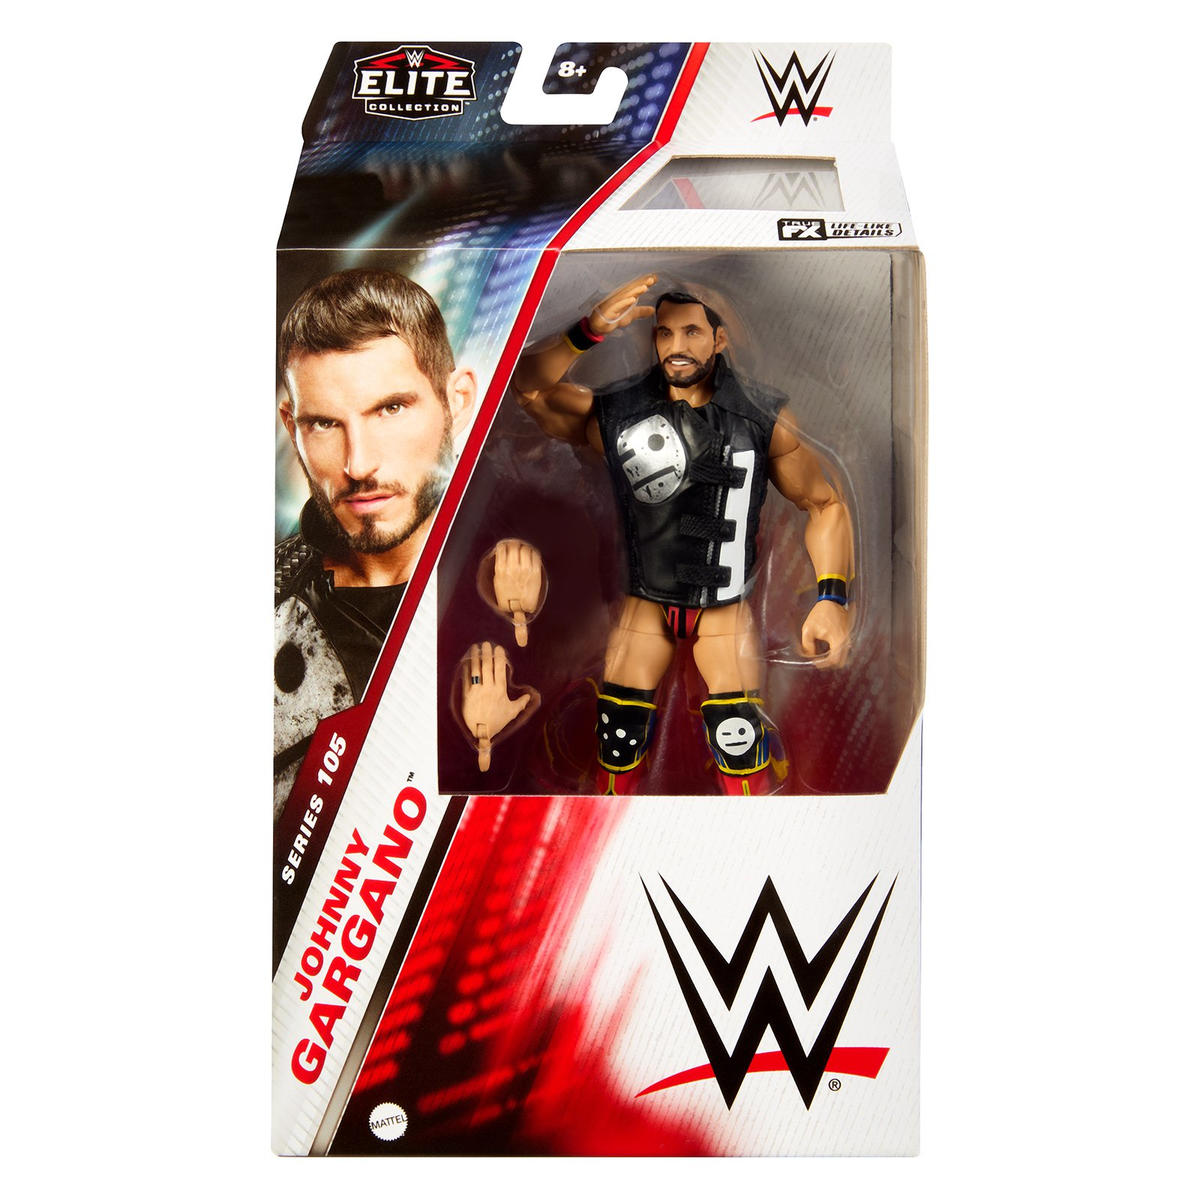 WWE ELITE FIGURE ASSORTMENT SERIES NO. 105 - The Toy Book